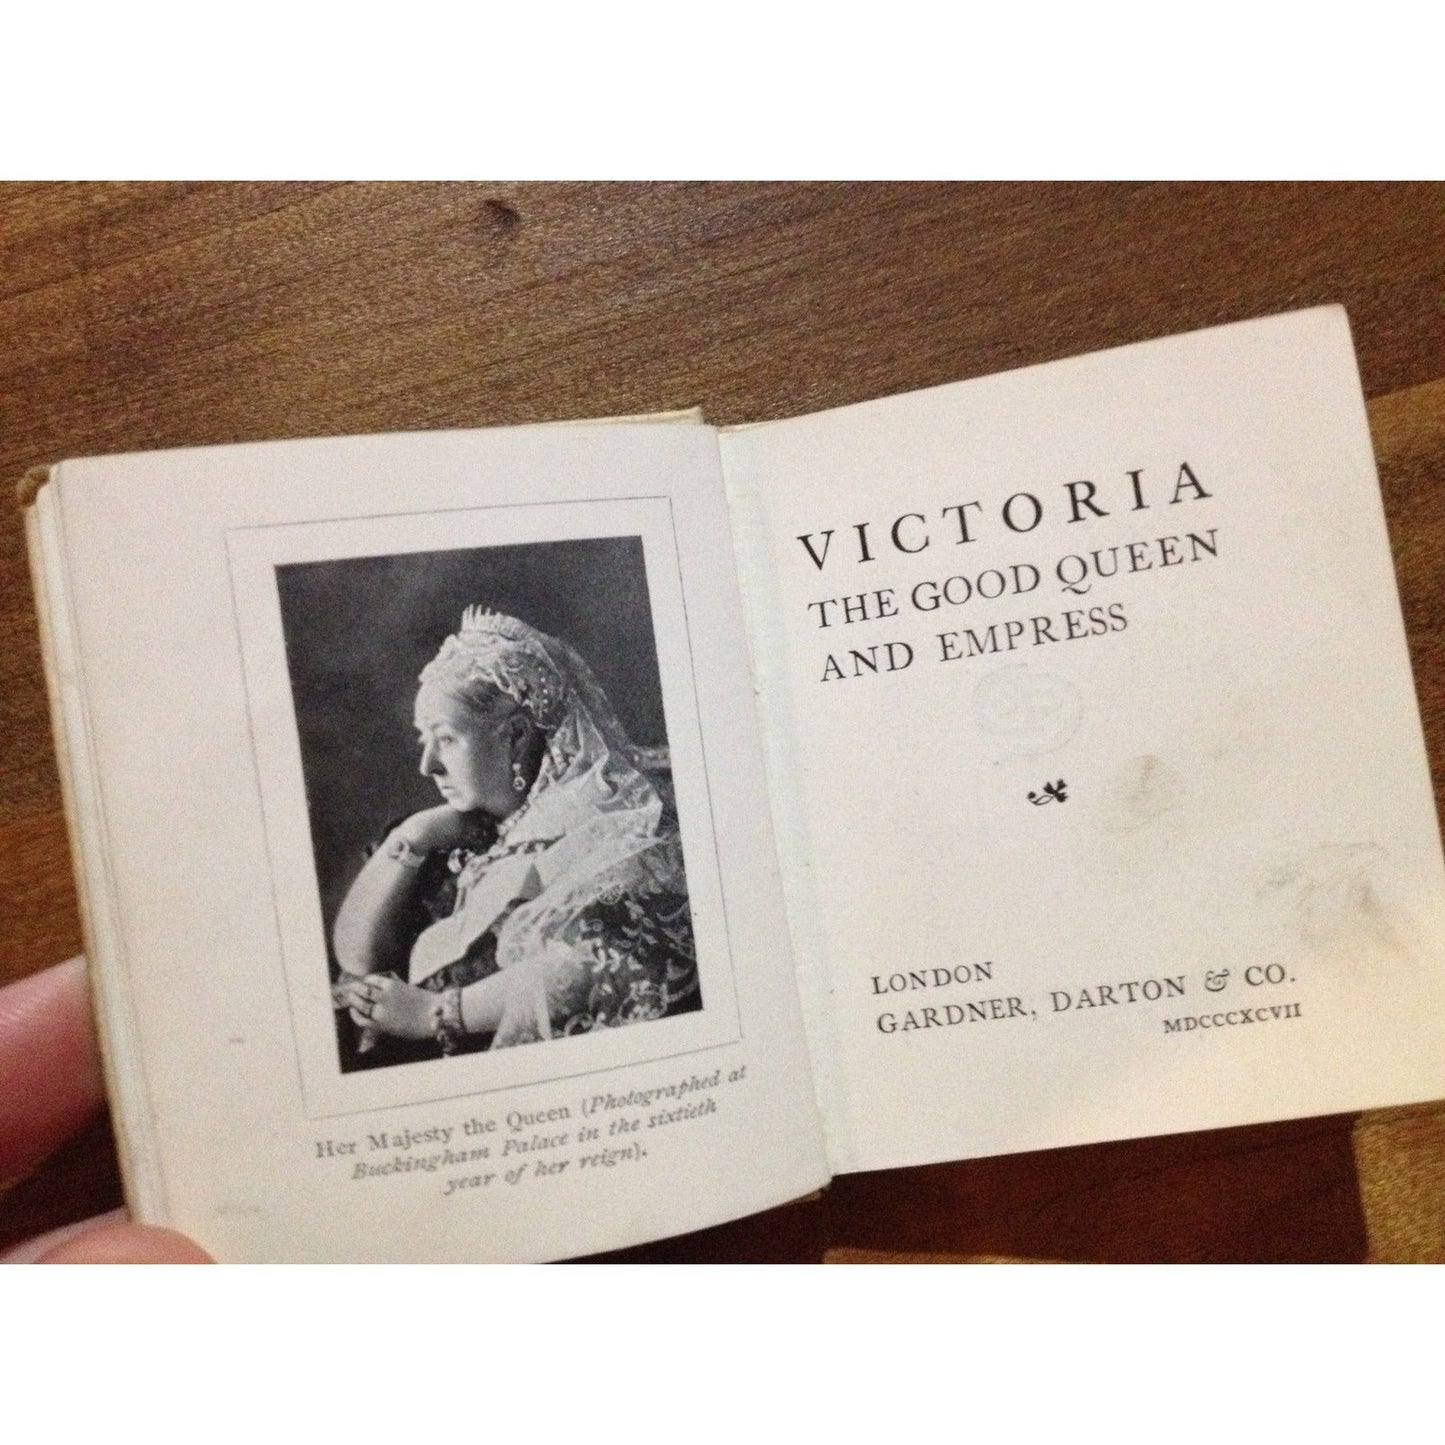 VICTORIA. THE GOOD QUEEN AND EMPRESS  BY: ELENOR BULLY BooksCardsNBikes